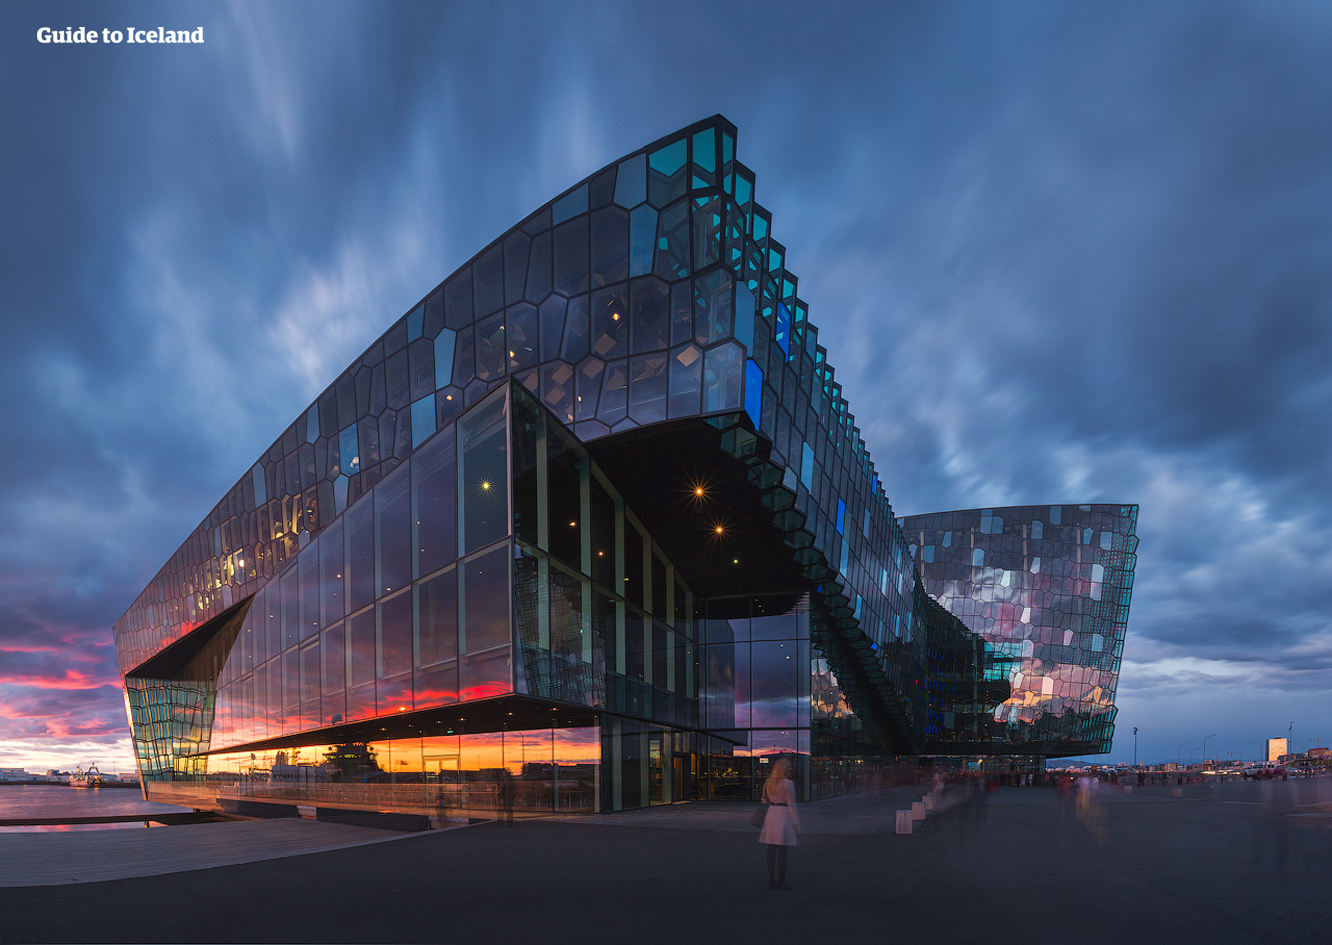 Harpa Concert Hall is one of the most defining building of Iceland's capital city.